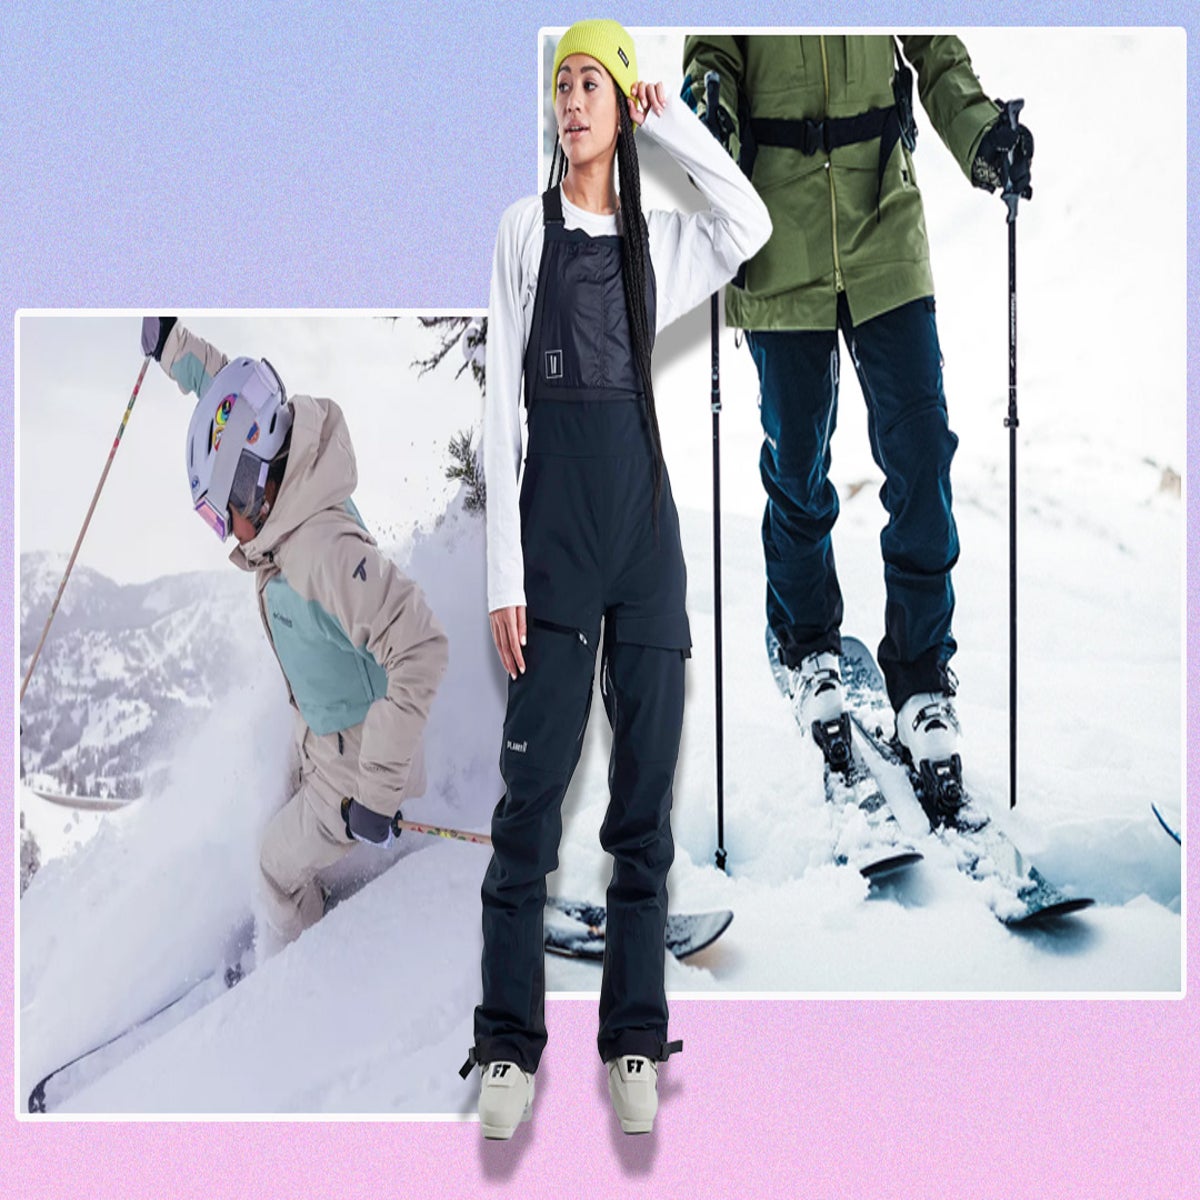 When ski pants truly change a woman's world (and body image)